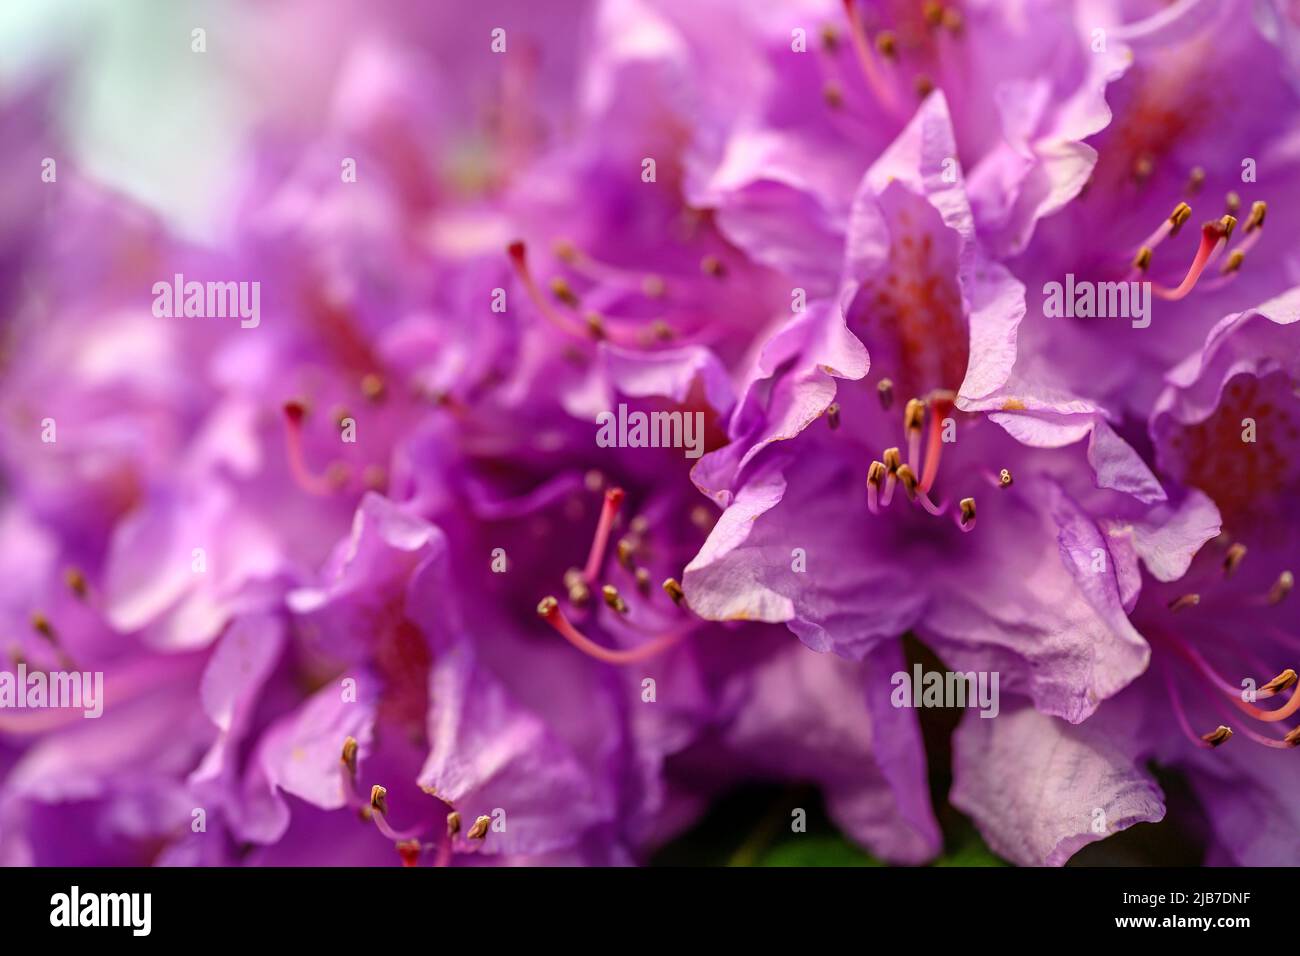 Close up of flowers with crinkled deep pink or purple petals. Flowers seen in Kent, UK in the spring. Stock Photo